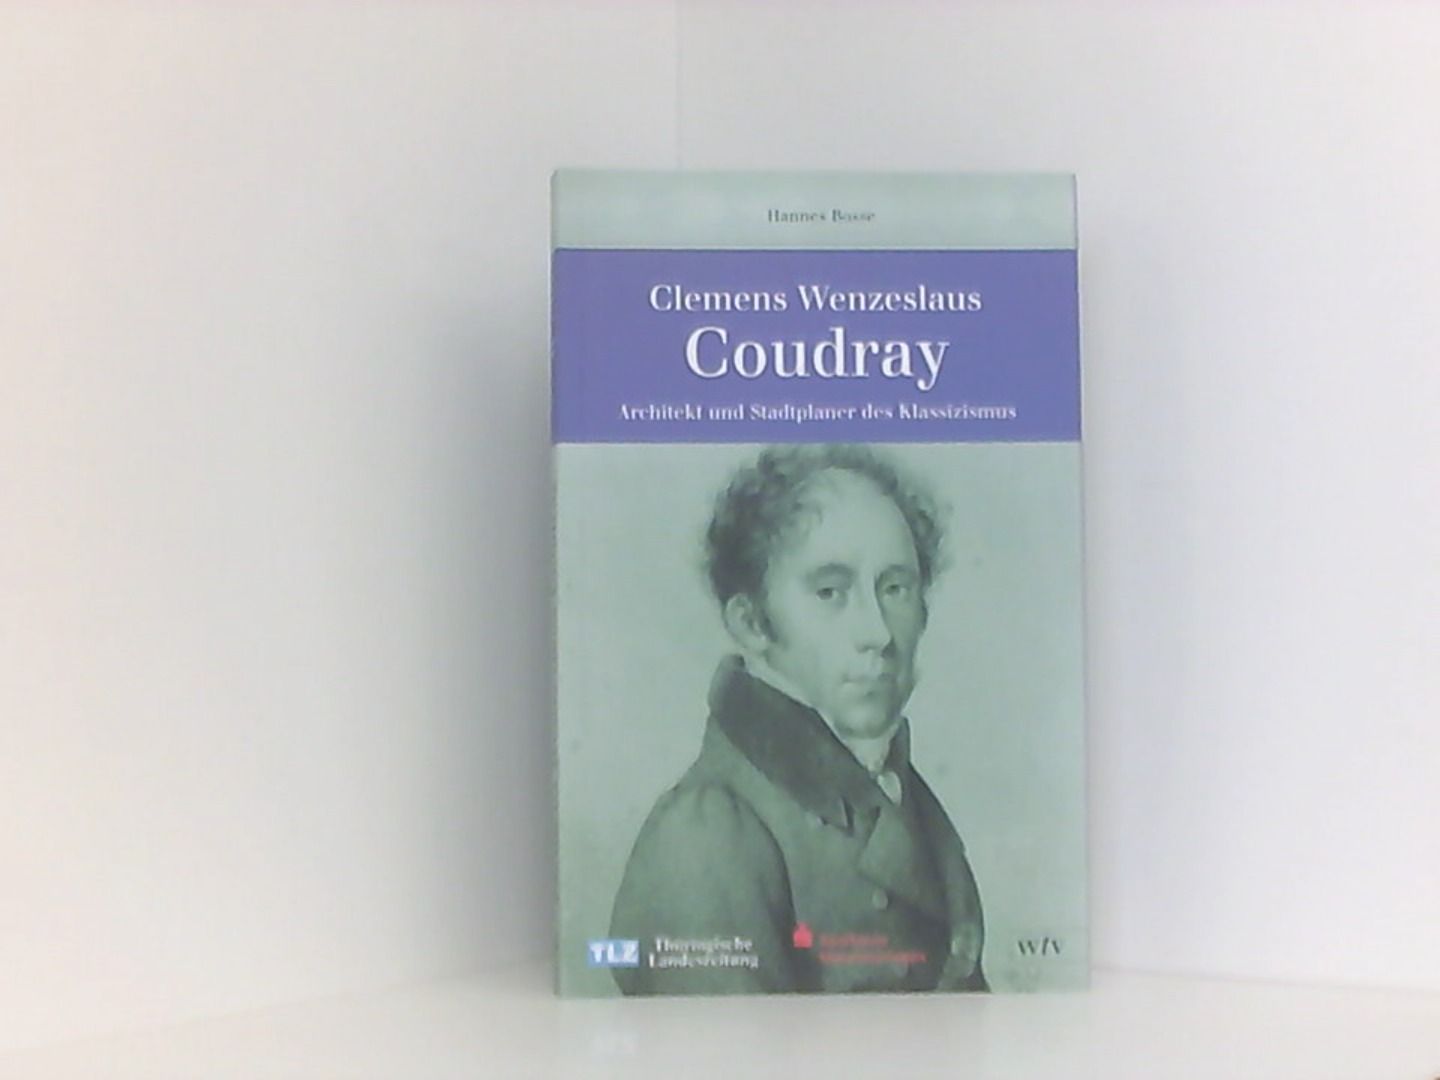 Clemens Wenzeslaus Coudray - Hannes, Bosse